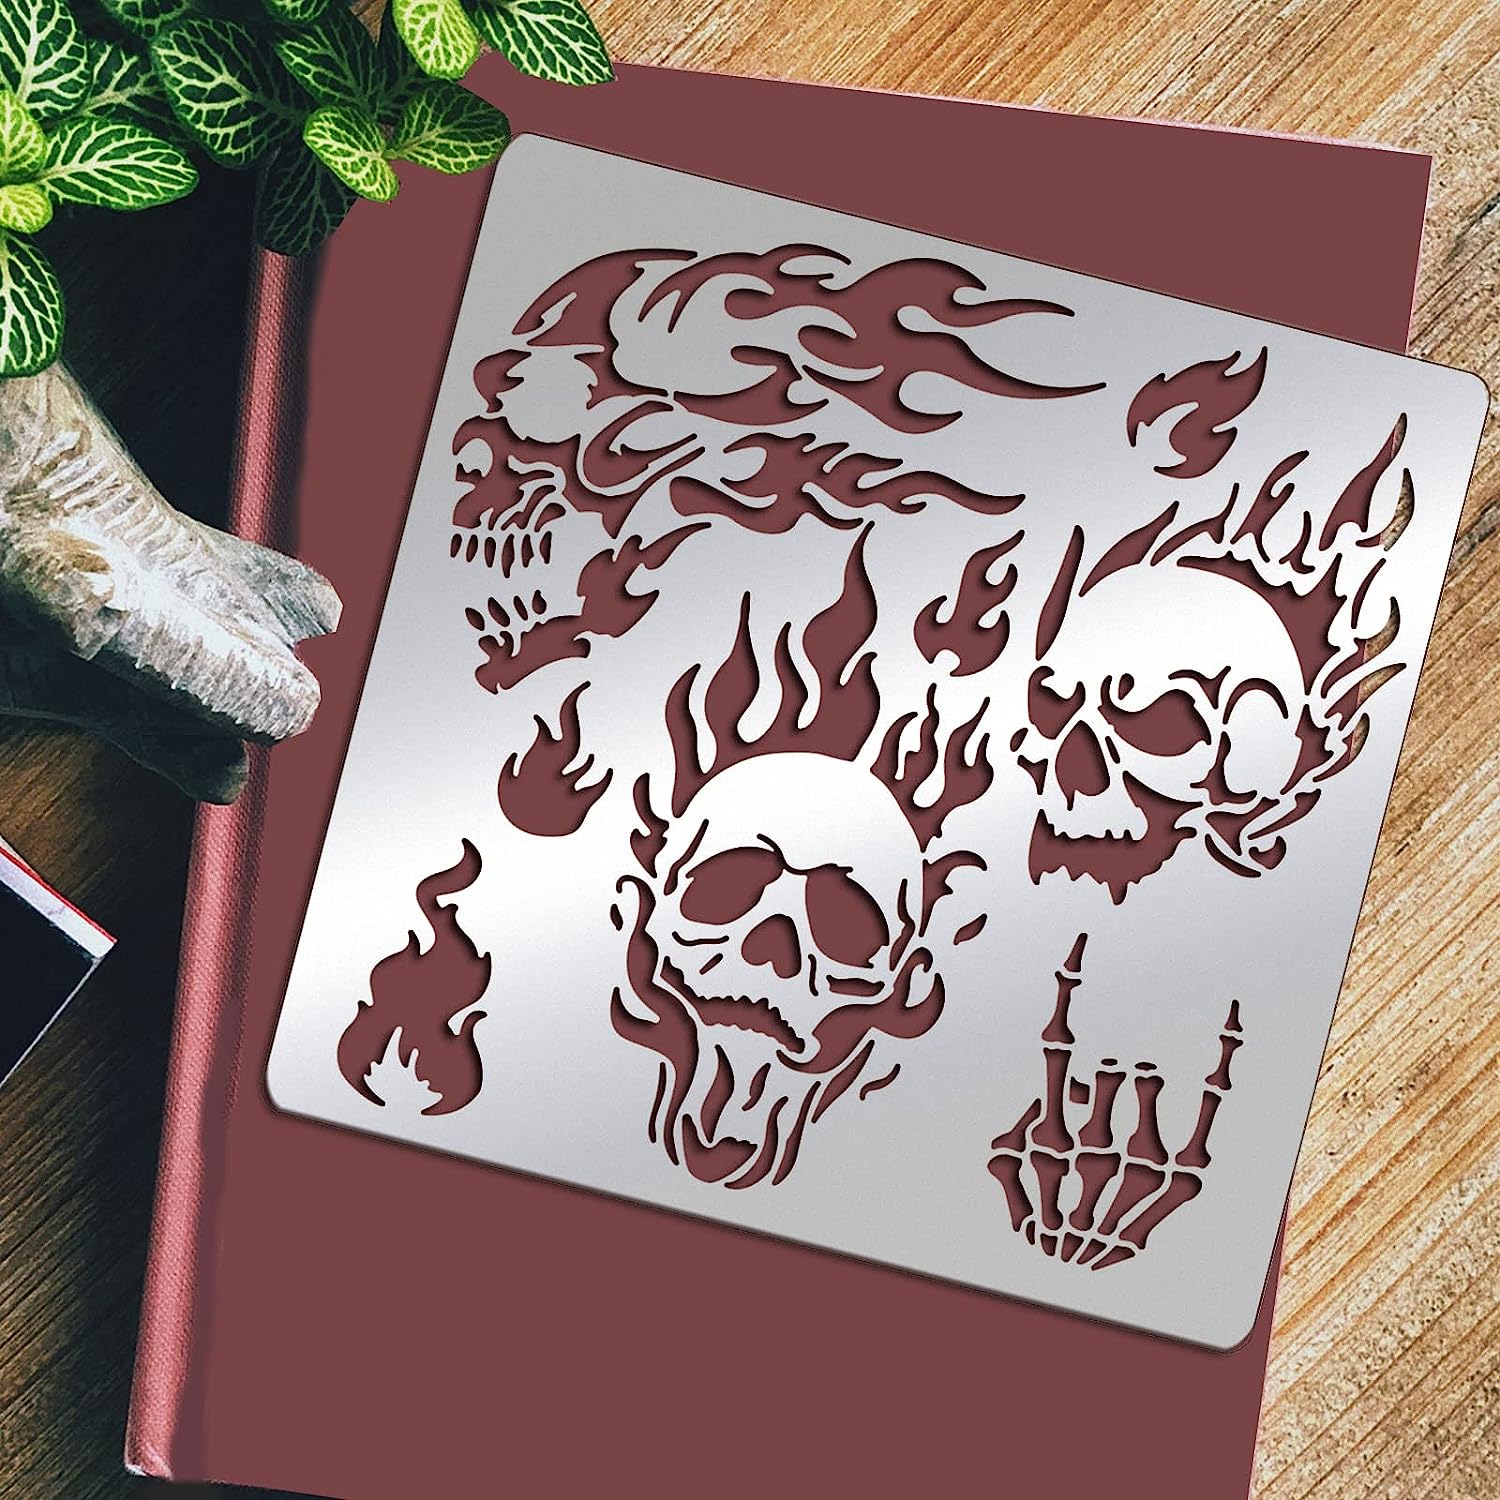 Metal Skull Stencil Fire Skull Pyrography Template for Wood Carving, Drawings and Woodburning